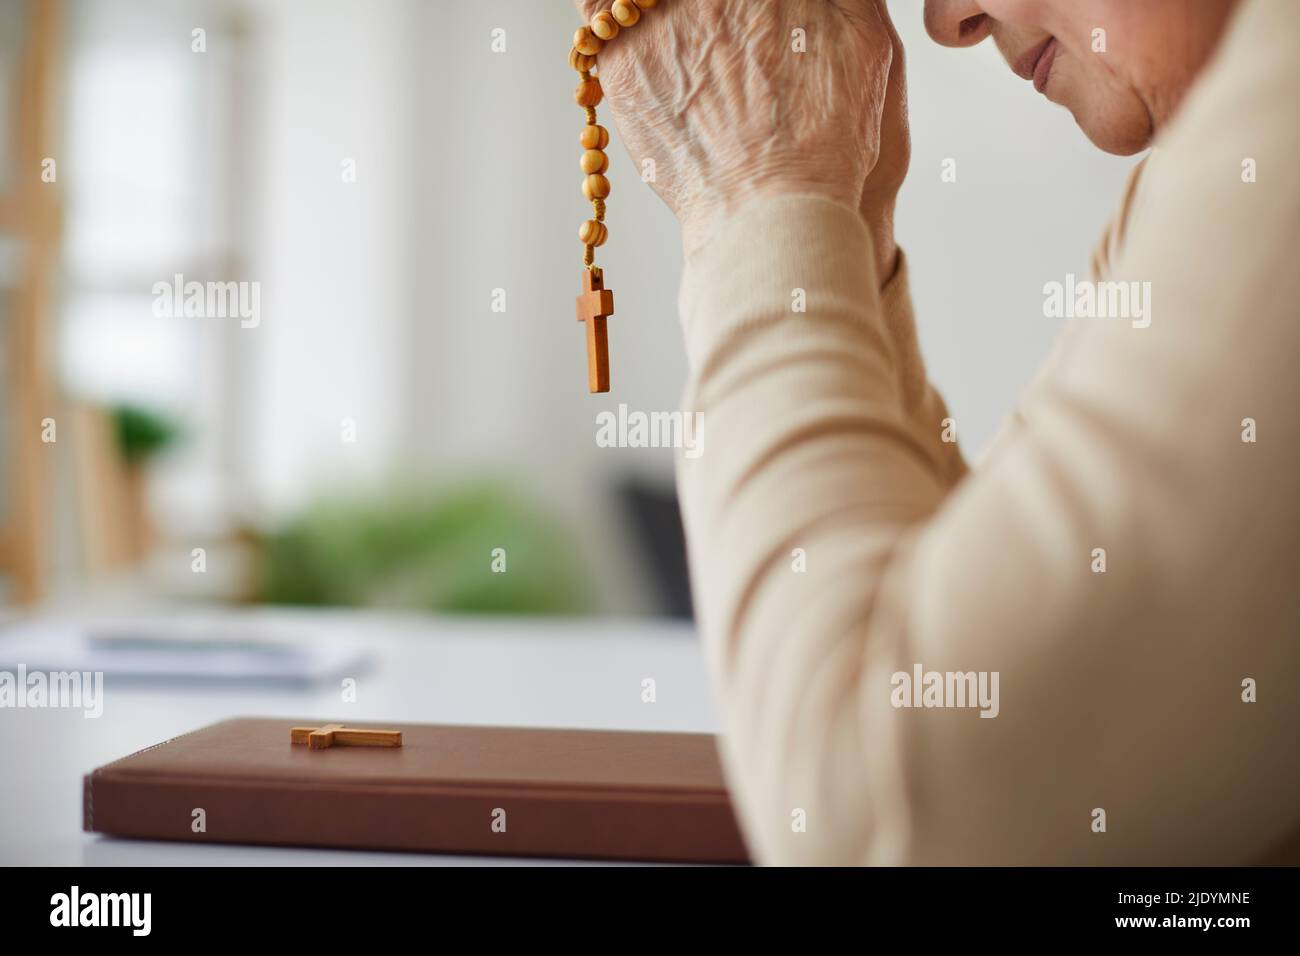 Senior Christian woman praying to God and holding rosary beads over the Holy Bible Stock Photo